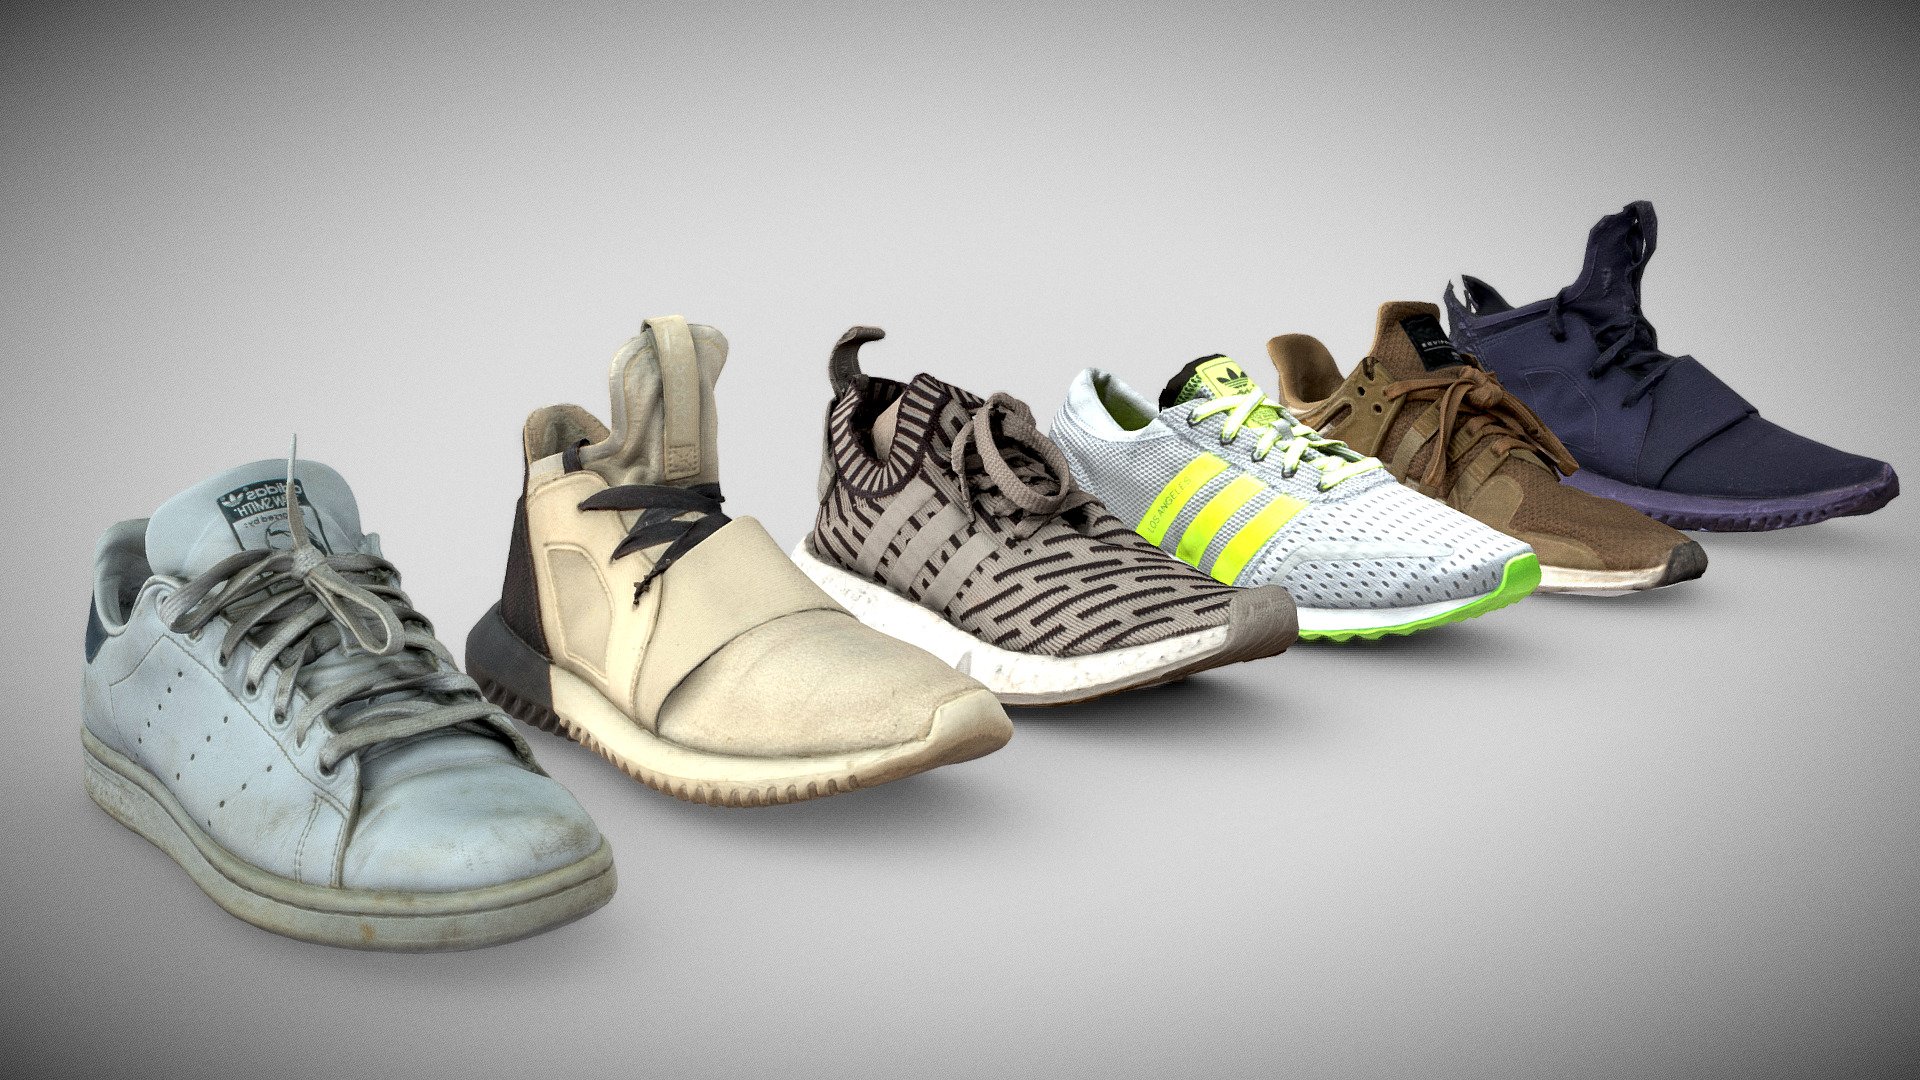 Adidas Shoes Bundle photogrammetry assets.

Sorry by advance for the topologies differences, my workflow change through the years 3d model